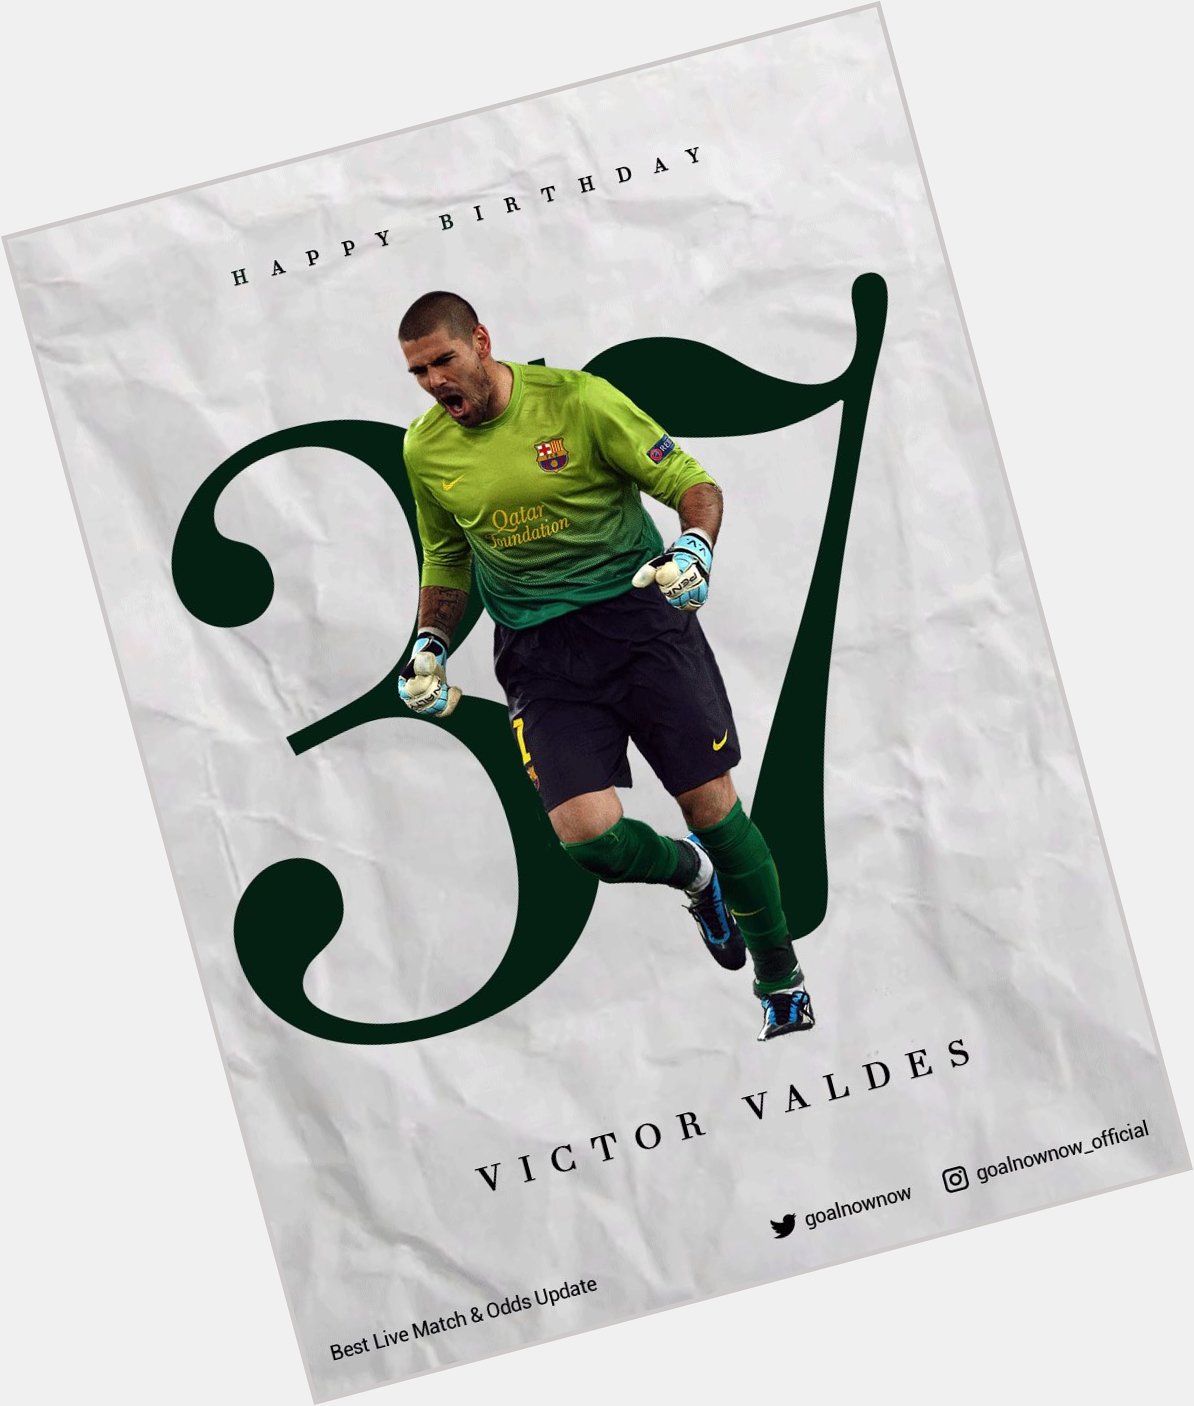 Happy Birthday, Victor Valdes! 597 games

261 clean sheets

24 trophies.  